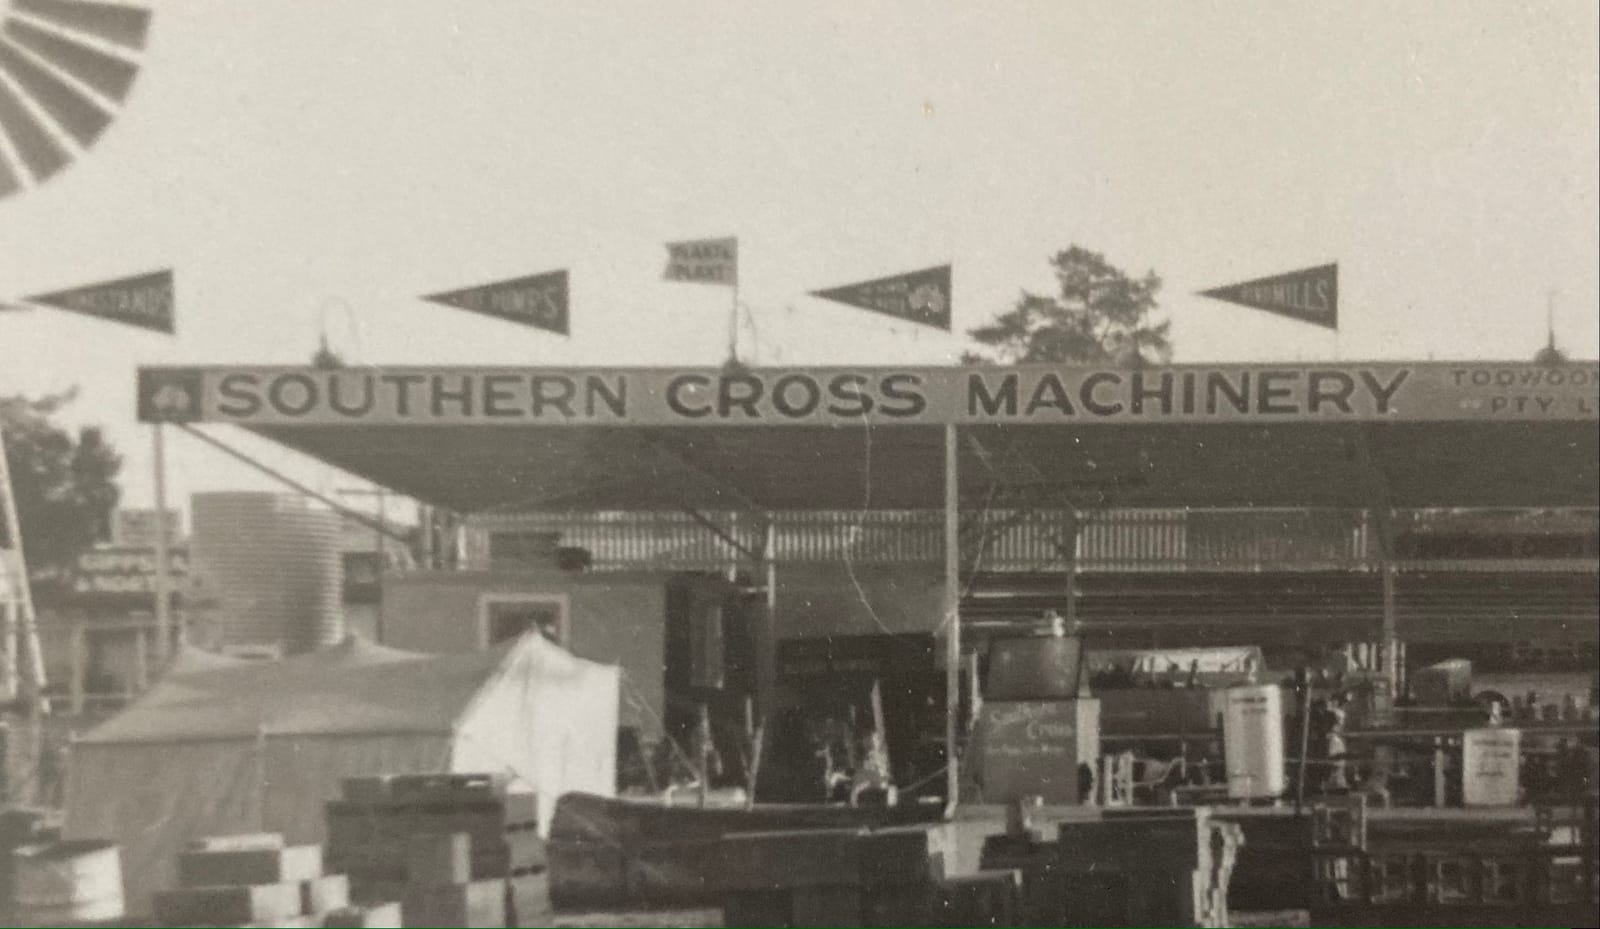 Large industrial retail space with flags flying above the flat roof which has a hand-painted awning that reads "Southern Cross Machinery".